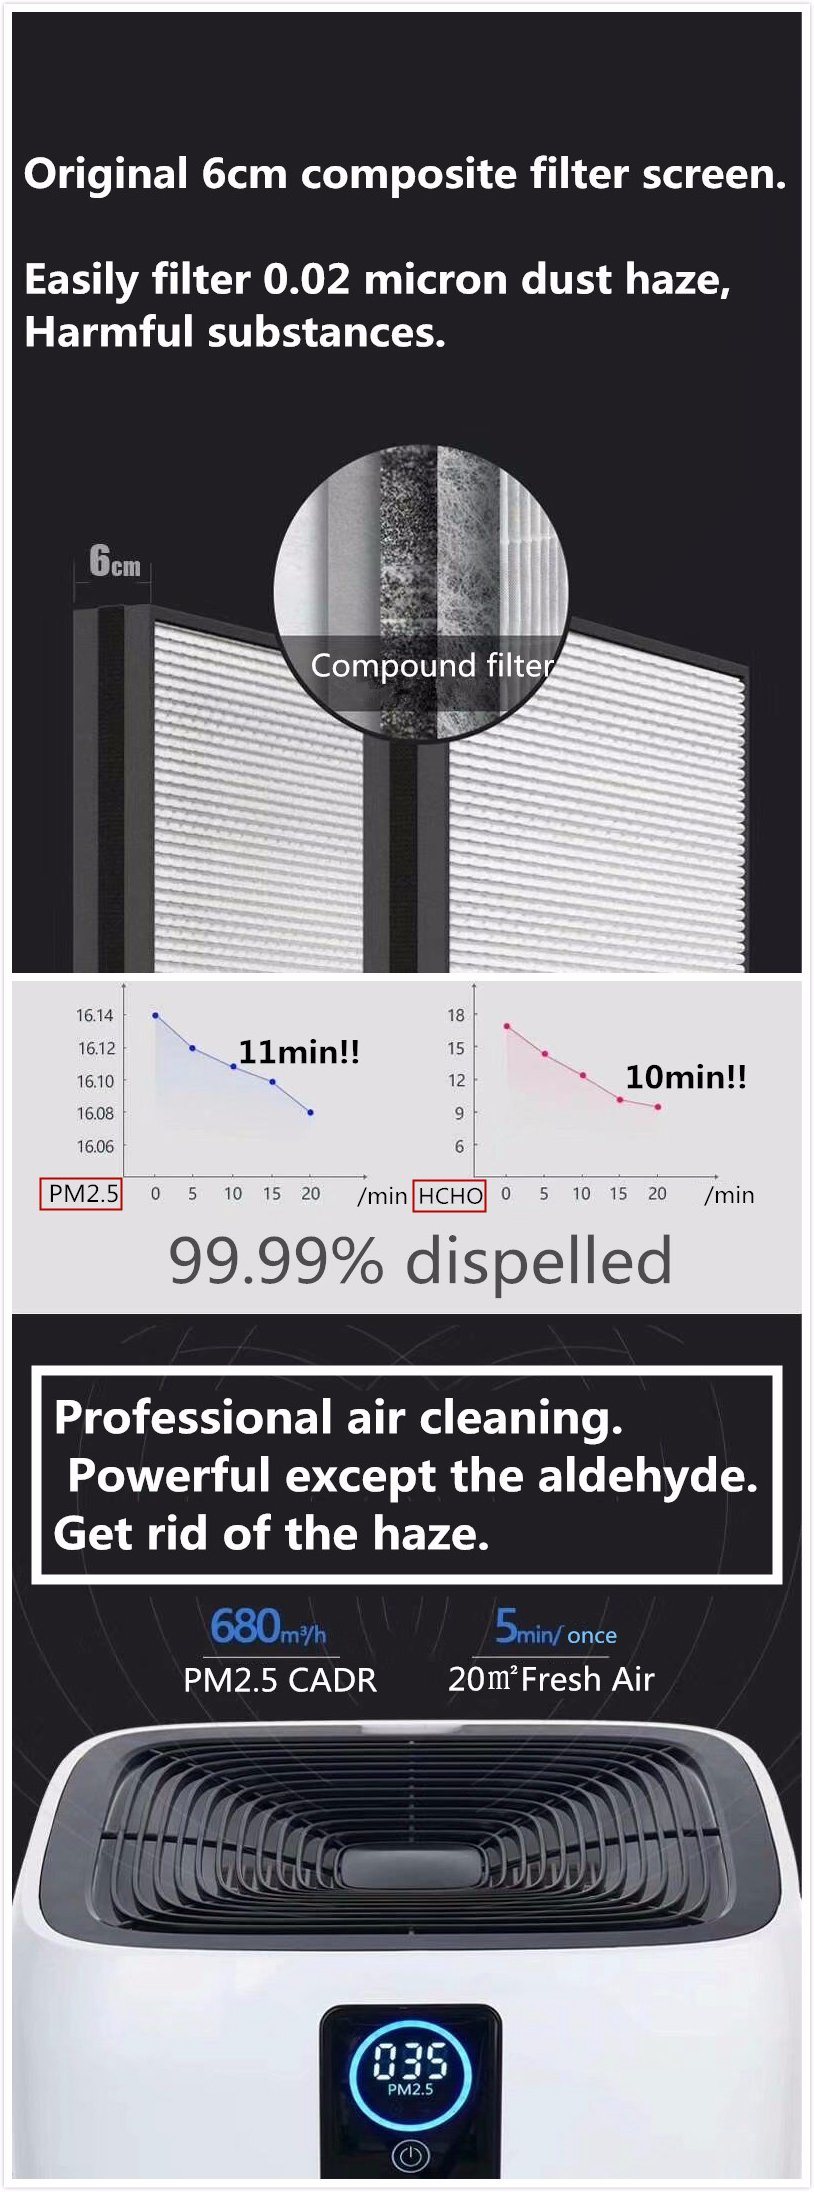 Top Selling China Manfufacture Activated Carbon Home HEPA Filter Air Purifier